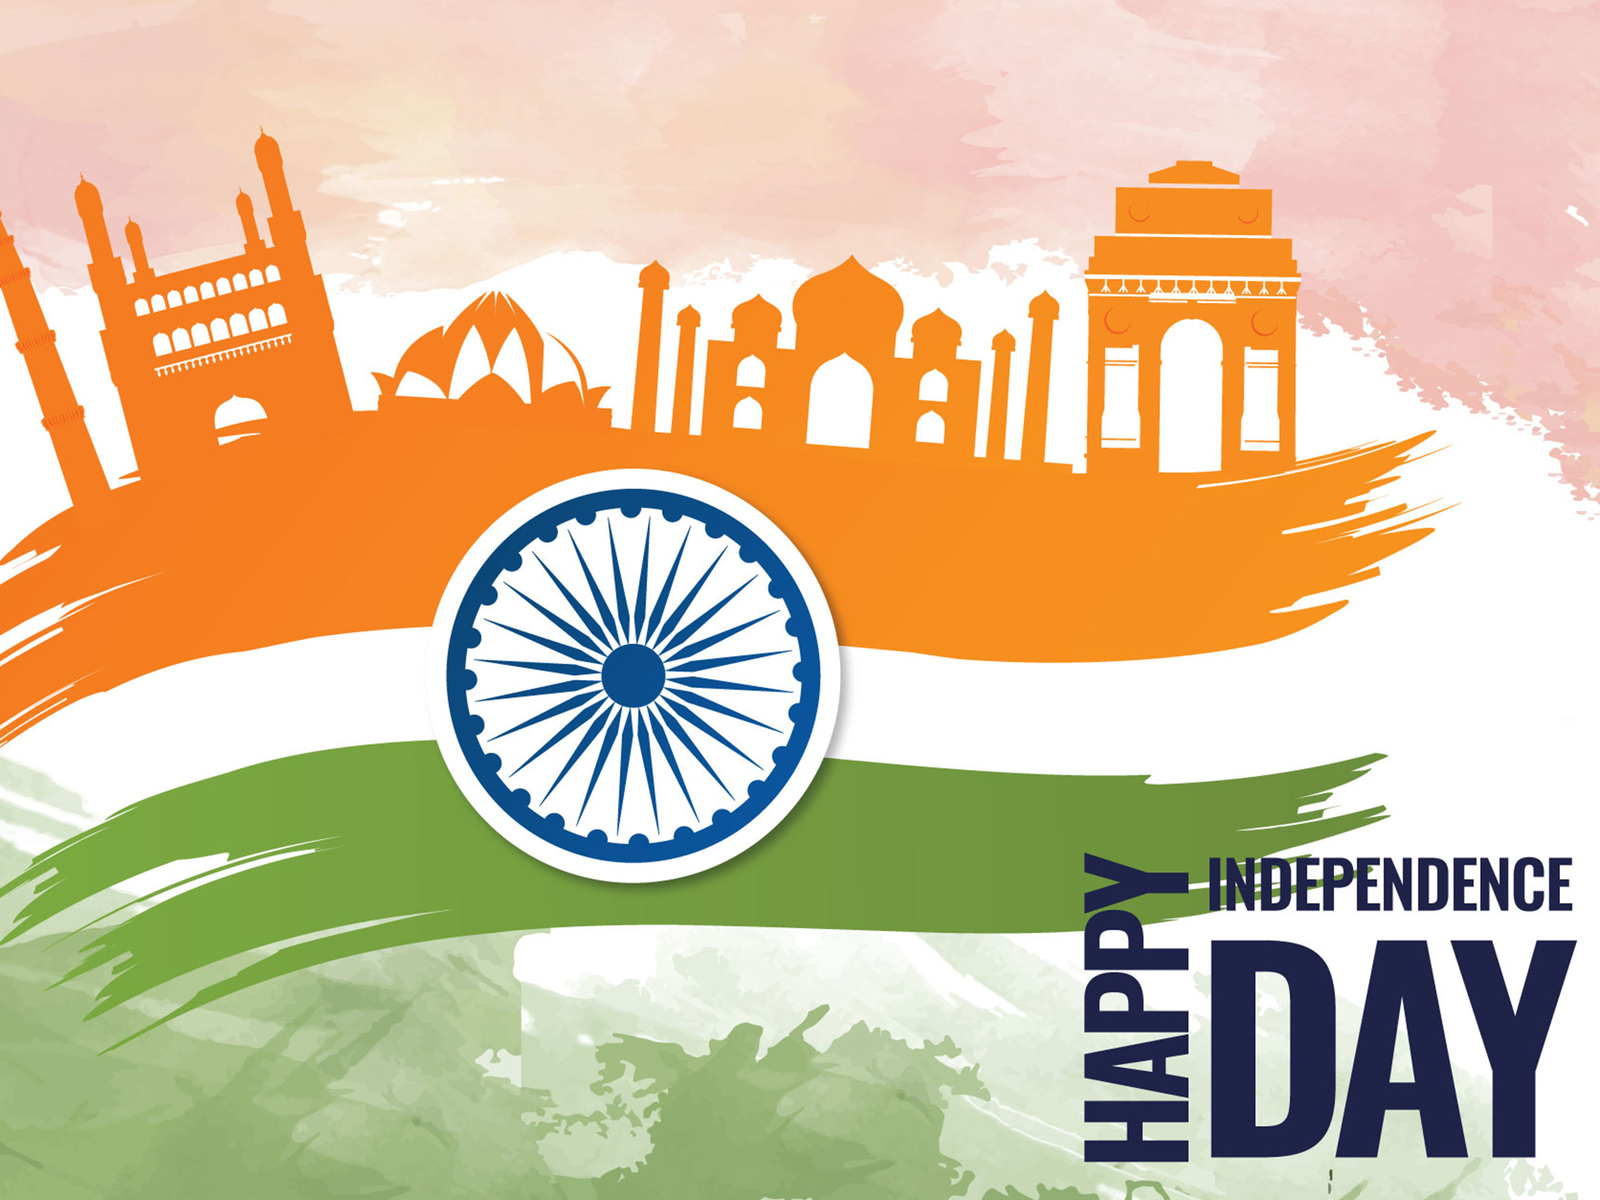 India Independence Day Graphics by VictorThemes on Dribbble